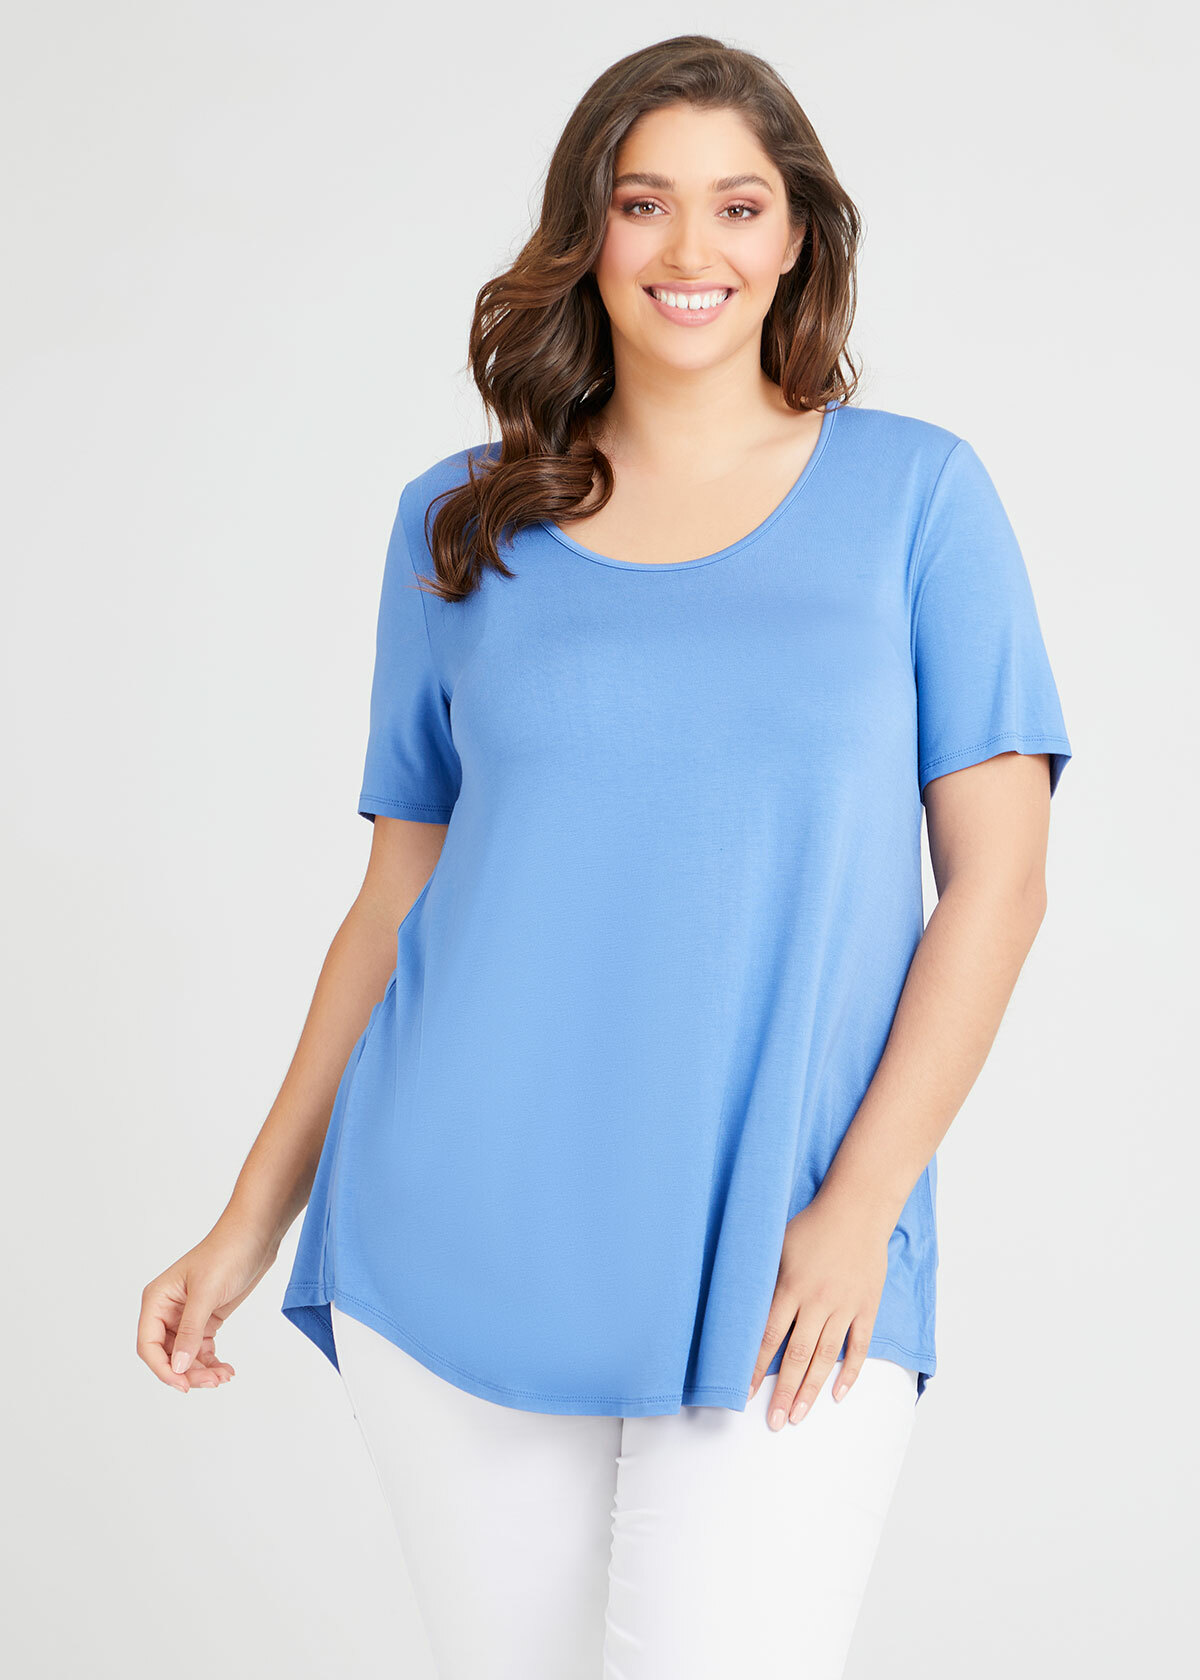 Shop Plus Size Bamboo Base Short Sleeve Top in Blue | Sizes 12-30 ...